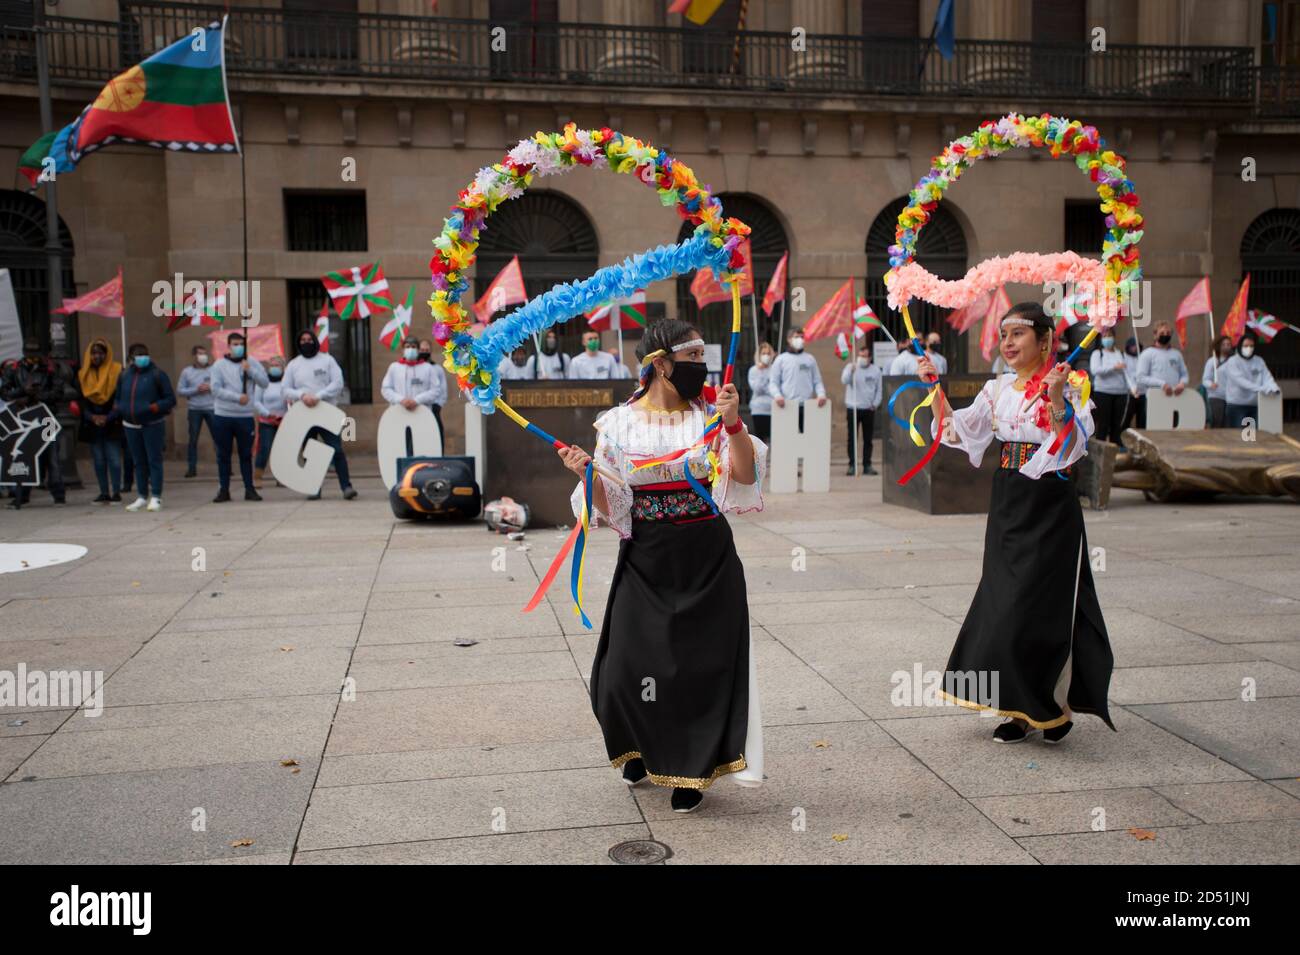 Pamplona, Spain. 12th Oct, 2020. Latin American women, (Cocanis of Oruro-Bolivia) are seen offering ancestral dances with masks, dances of the regions of Nicaragua and Bolivia, during the demonstration in Pamplona.Demonstrators organized by the radical sector of a political party, stage a demonstration performance where statues of the King of Spain, Philip VI and Christopher Columbus have been hanged, to criticize the imperial character of the Spanish Kingdom. Credit: SOPA Images Limited/Alamy Live News Stock Photo